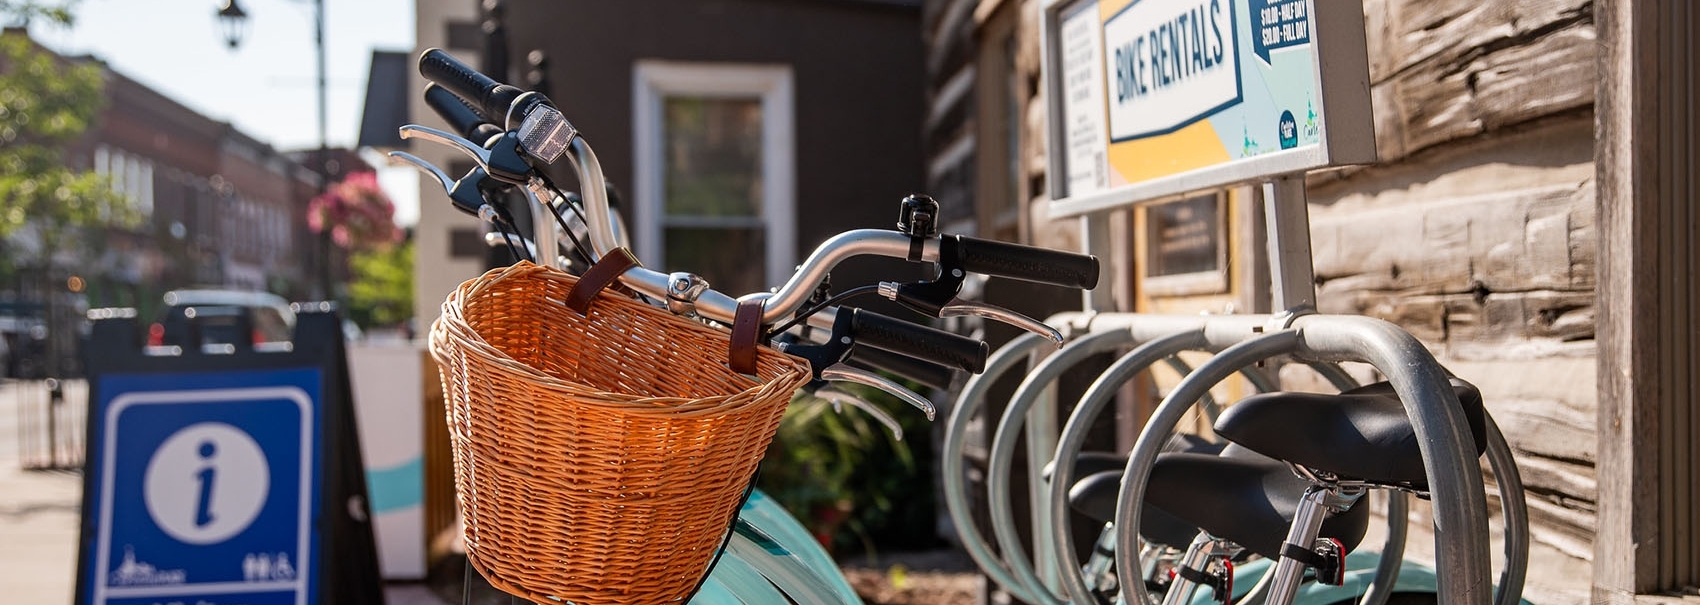 Images of bikes with baskets lined up